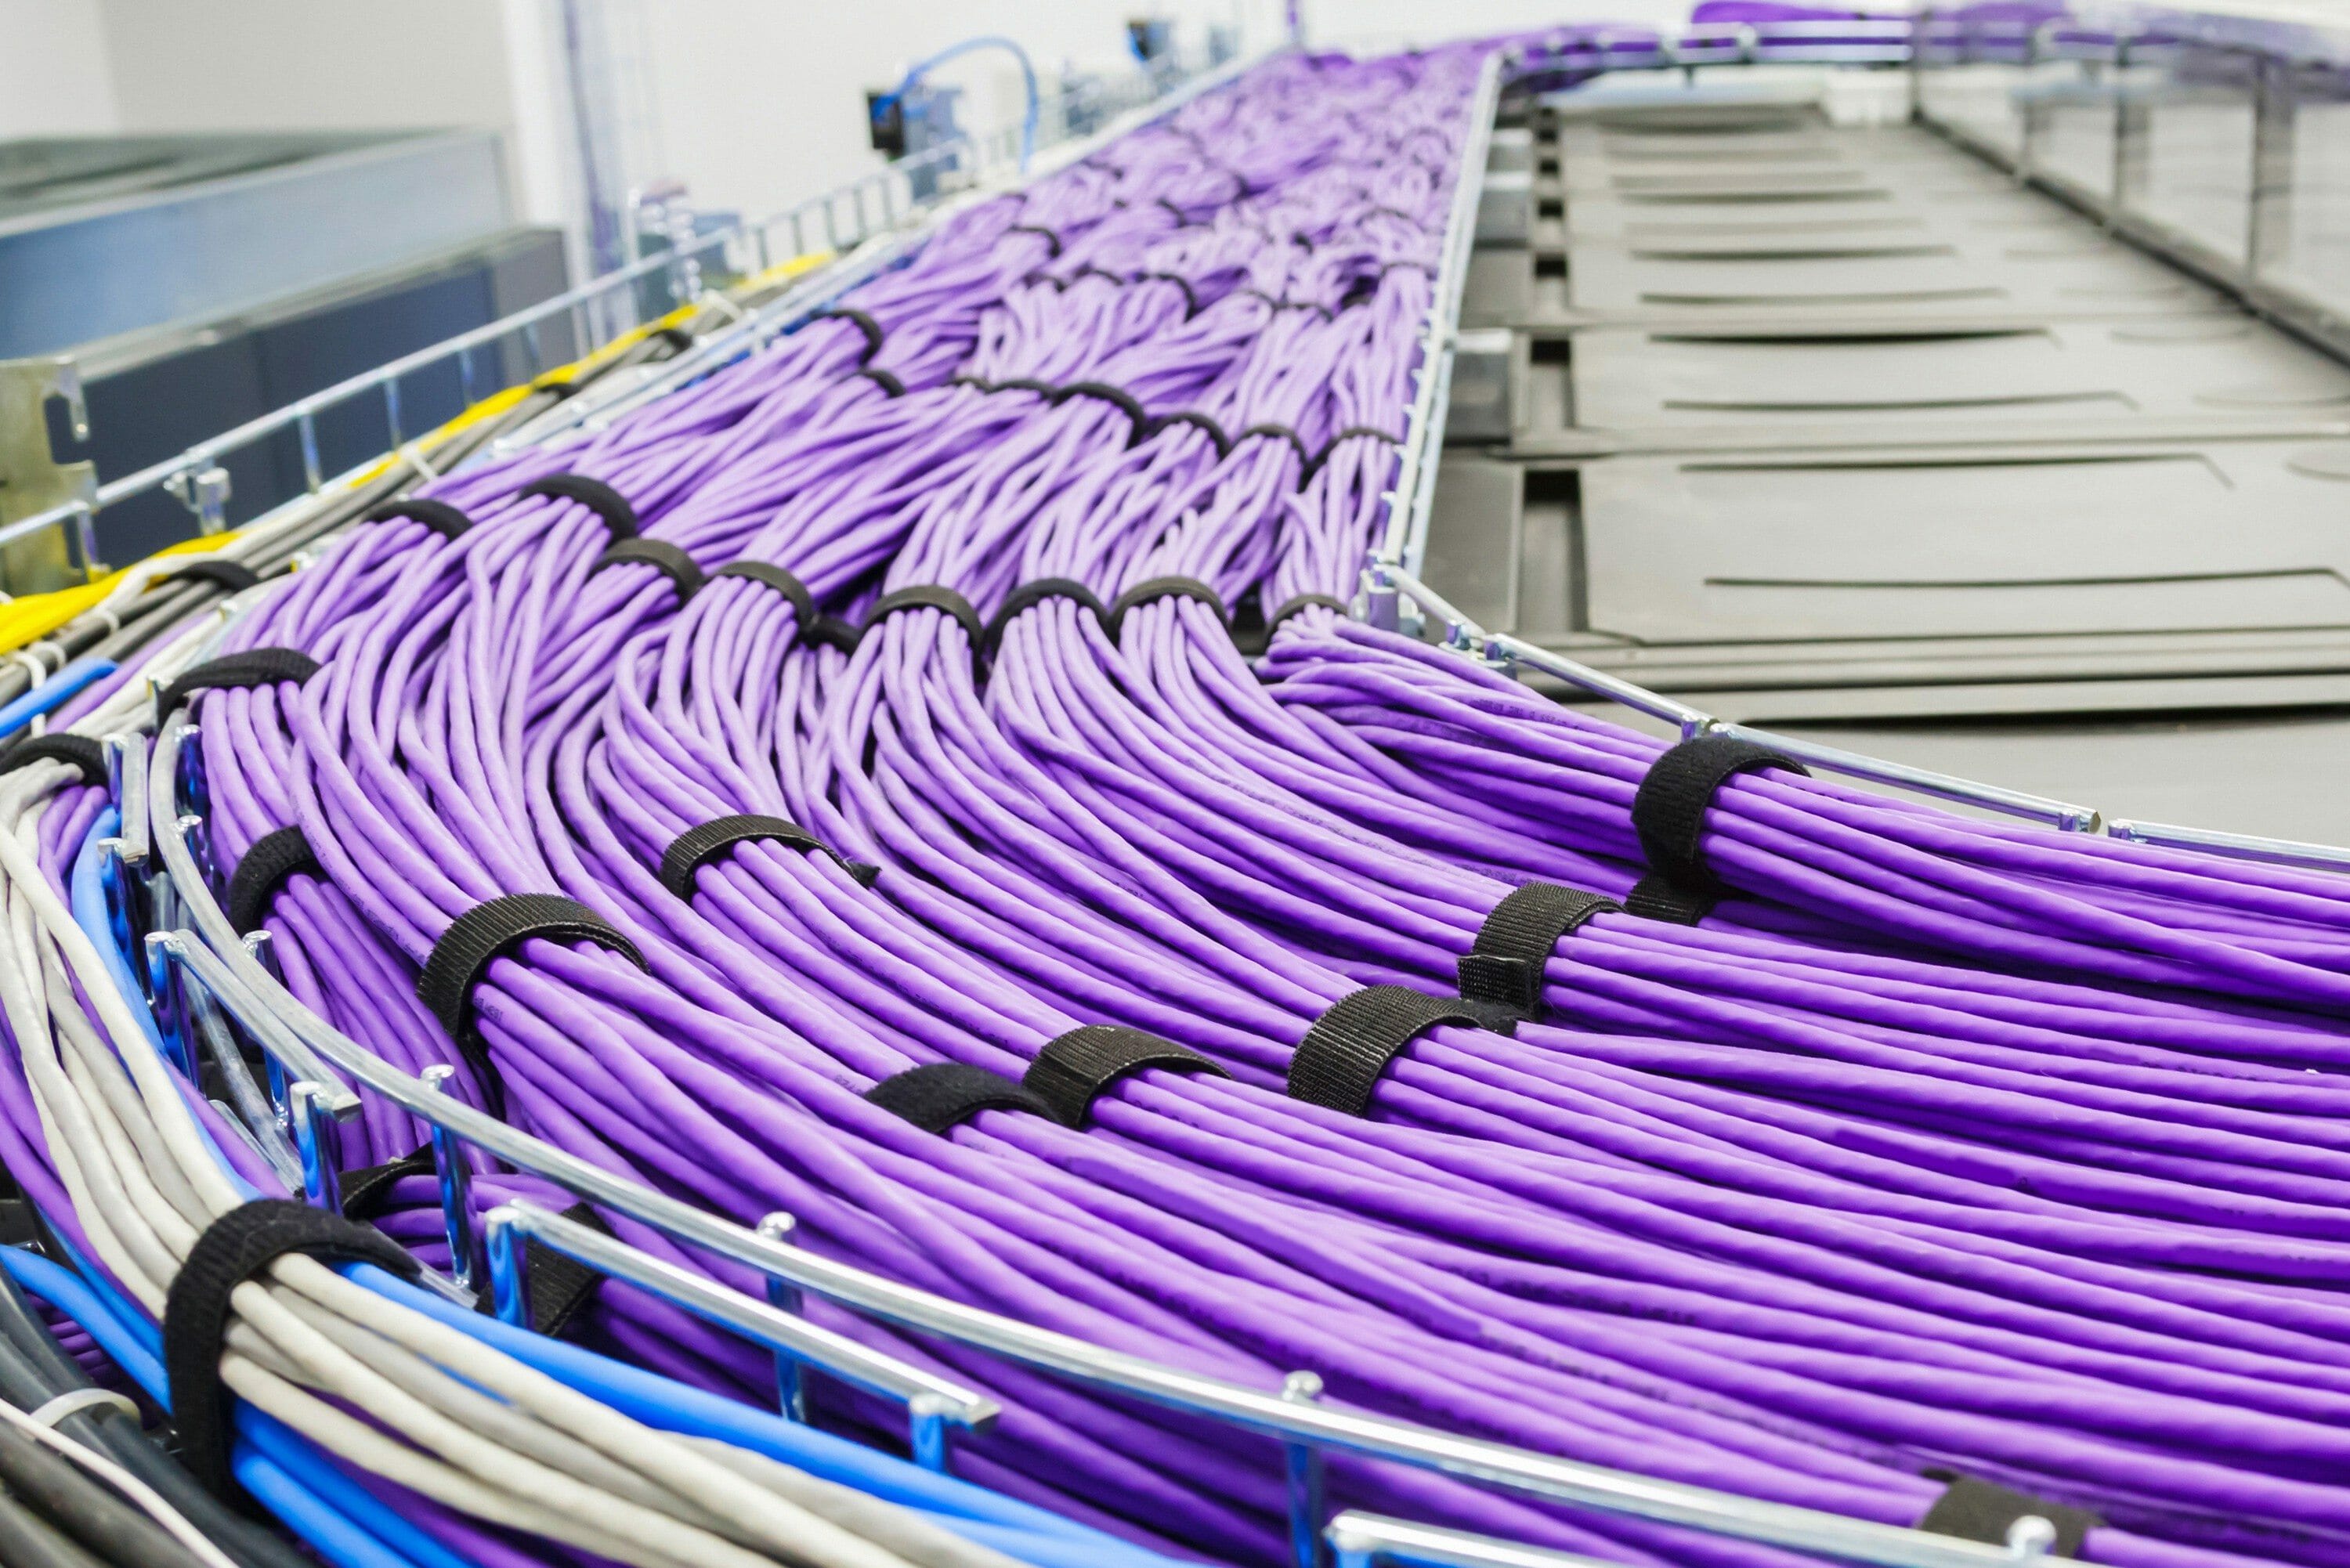 How to Improve Your PUE Through Cable Management